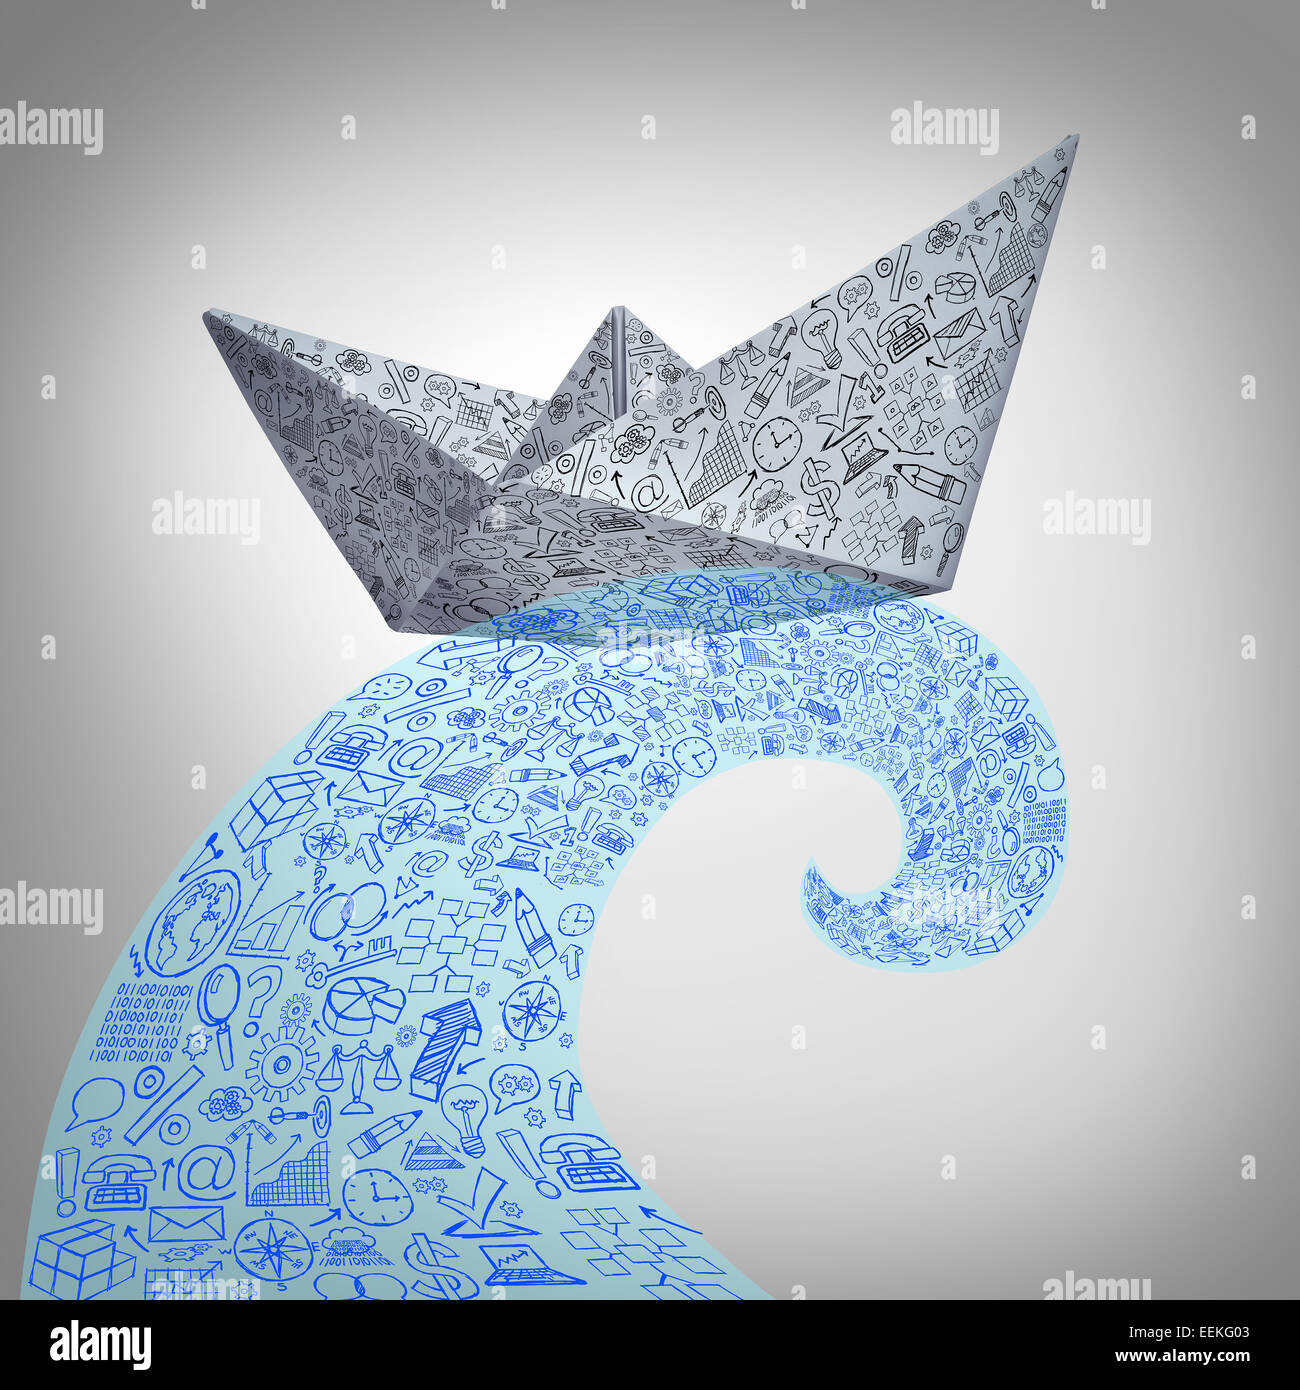 Paper boat business concept on a huge sea wave as a financial management symbol with an origami ship made from an office sheet with icons on the surface. Stock Photo